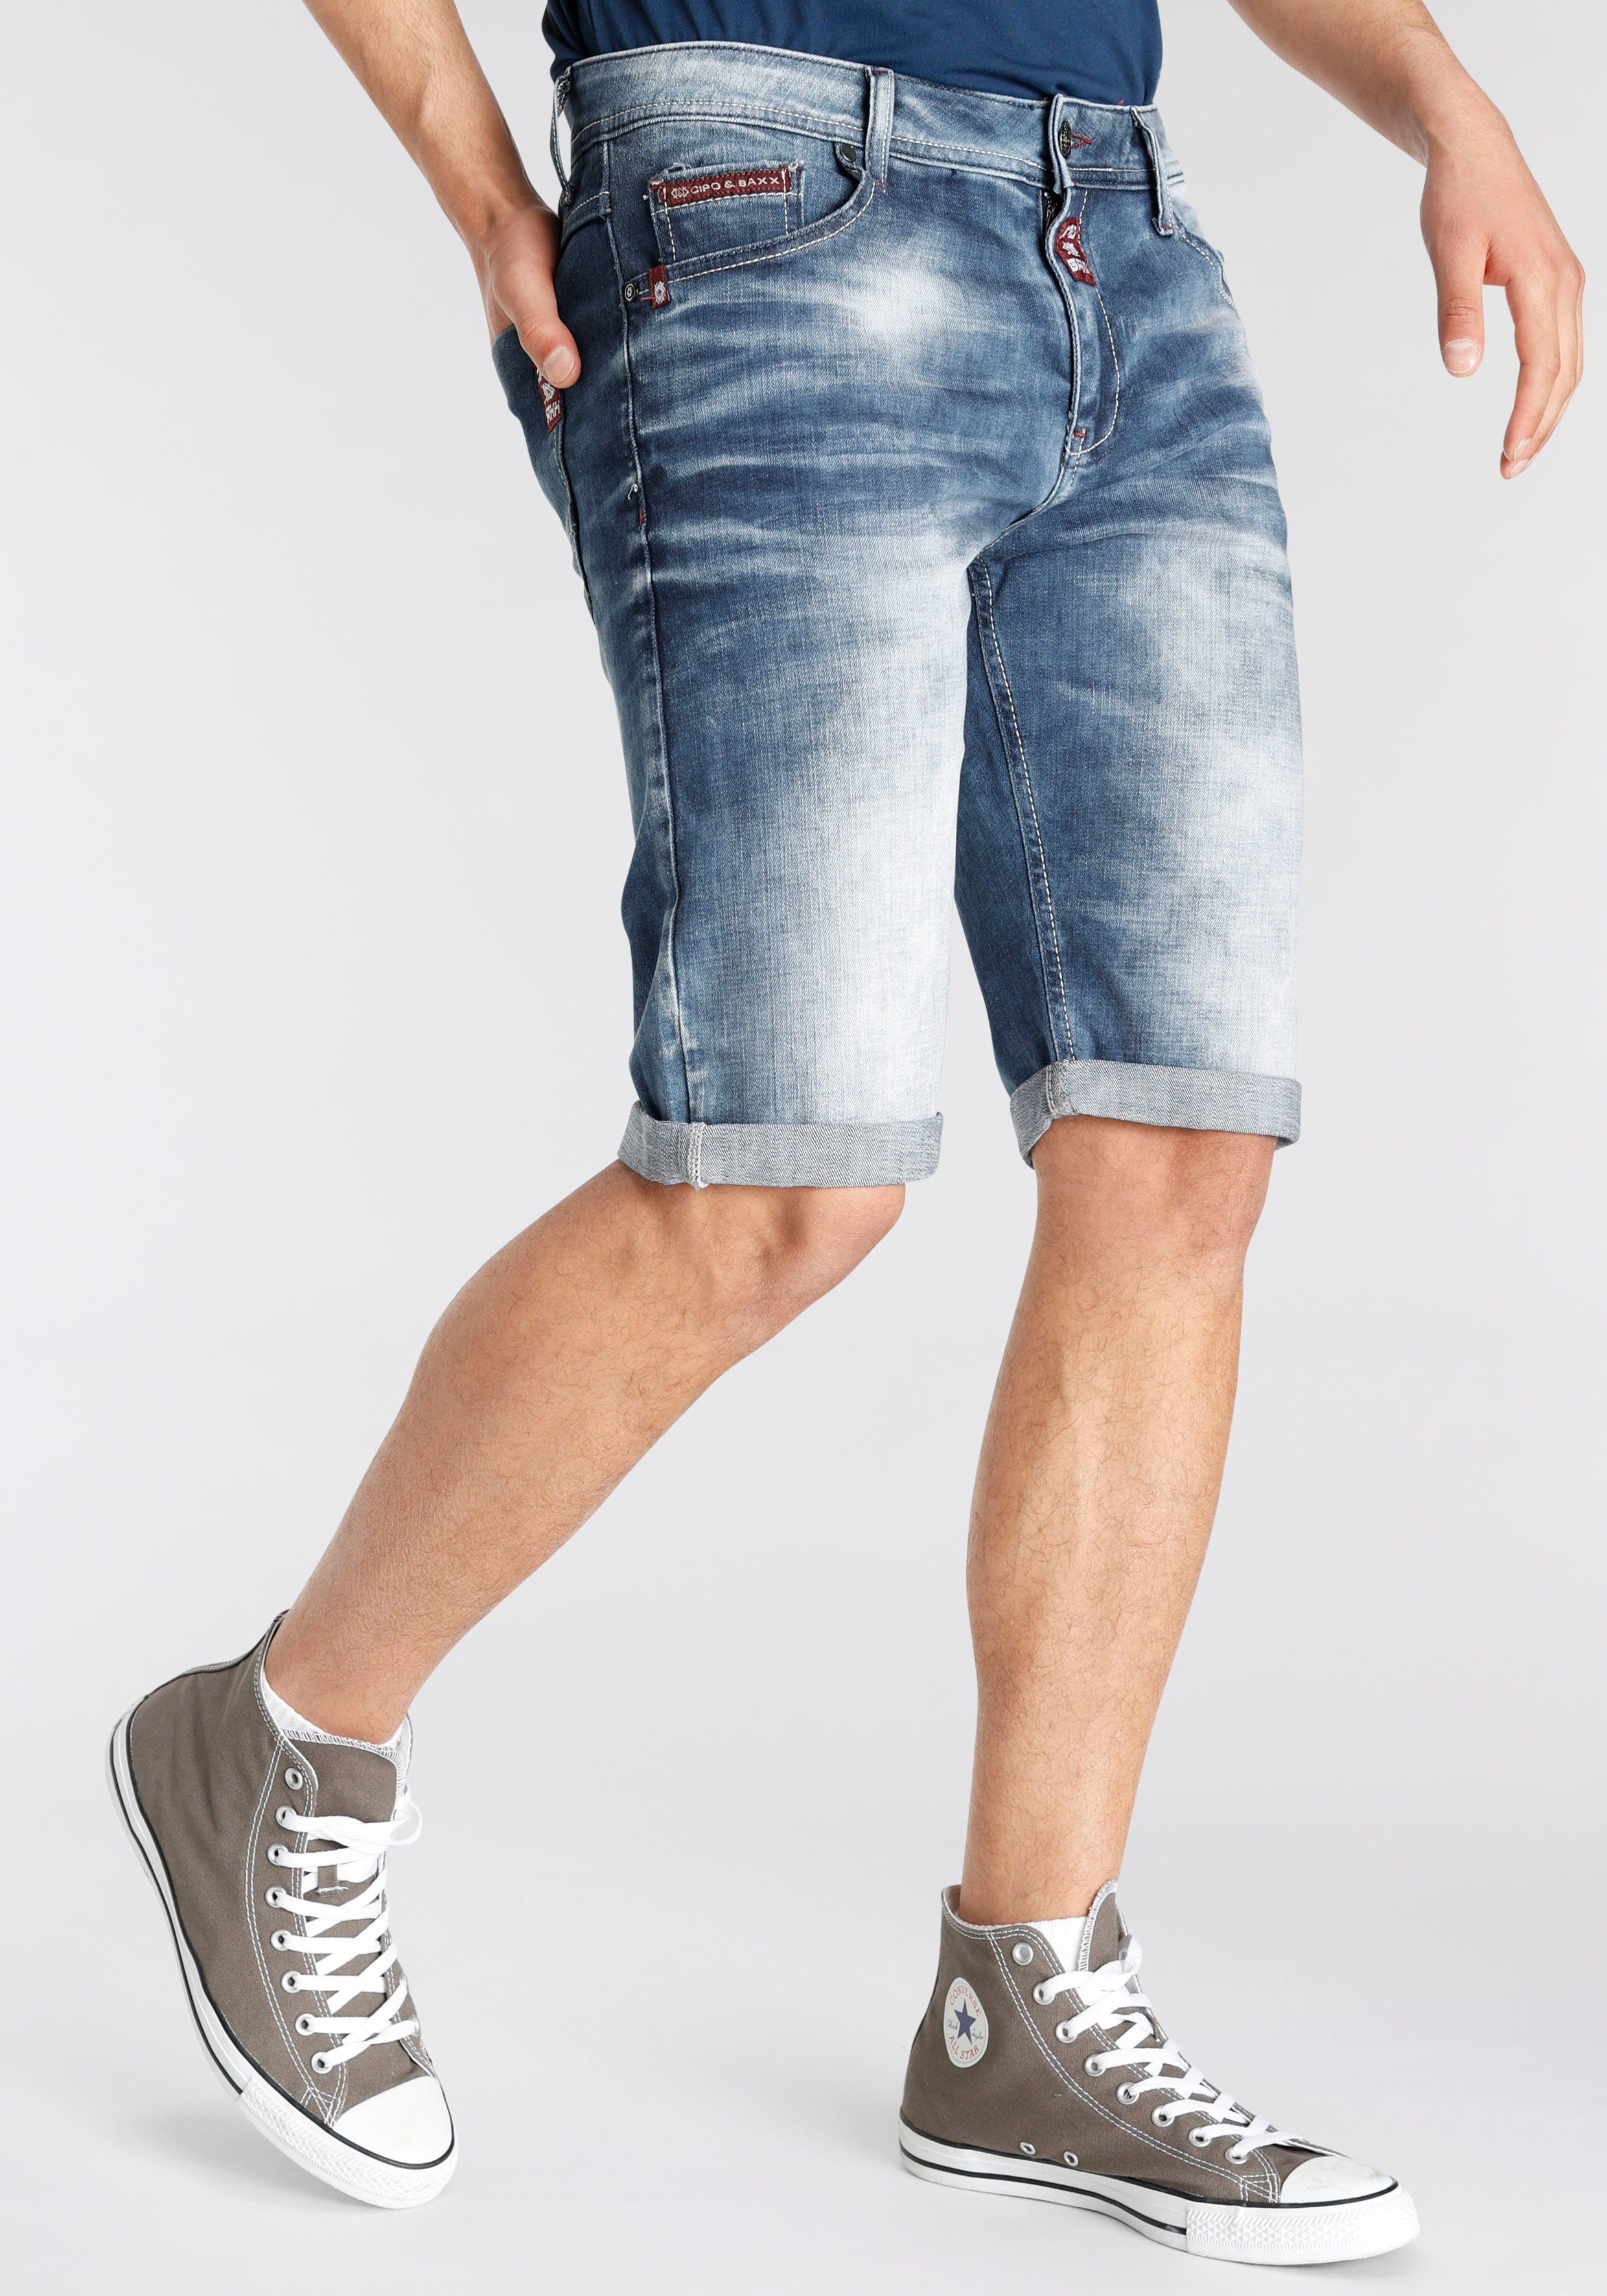 blue Baxx used Cipo & Jeansshorts